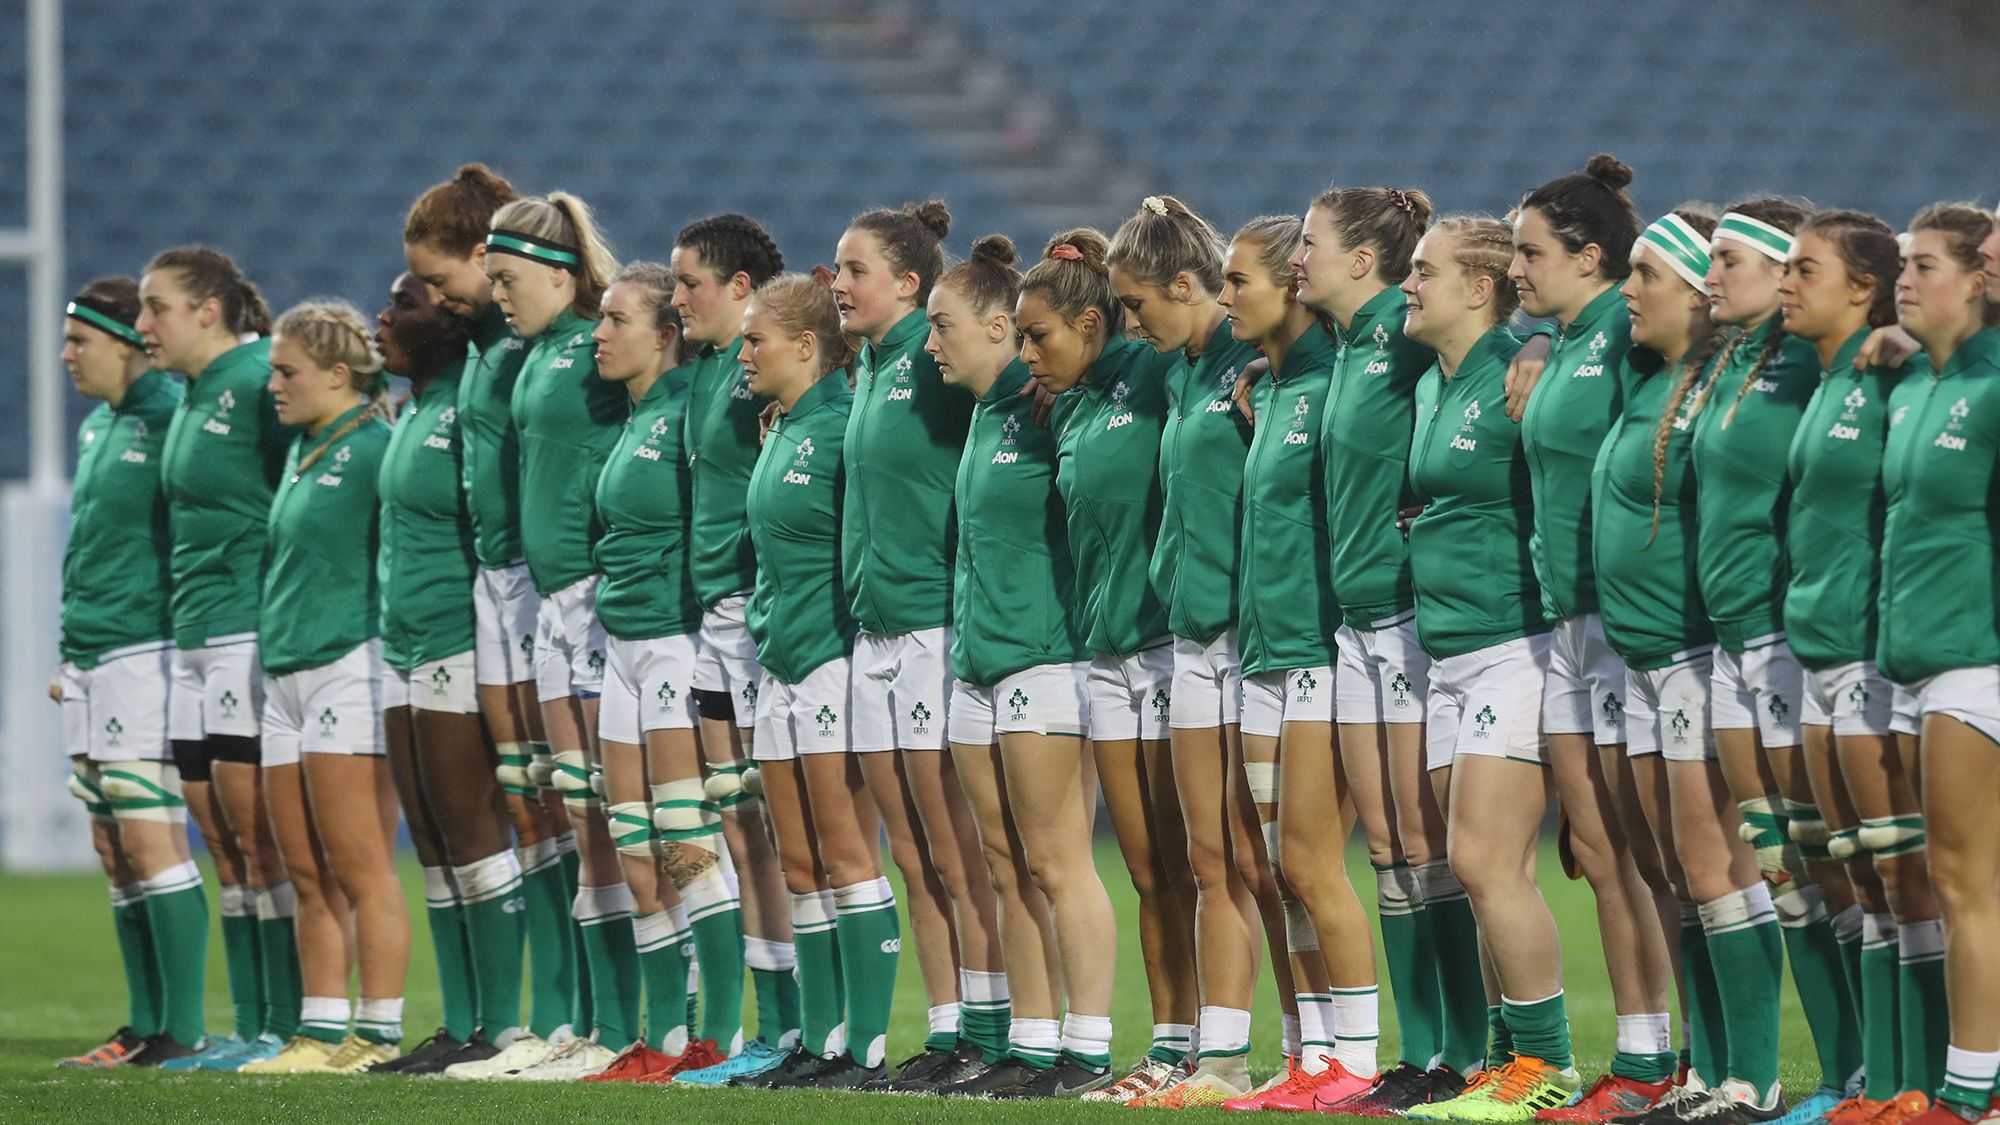 Ireland women's rugby team switch to dark shorts amid period anxieties